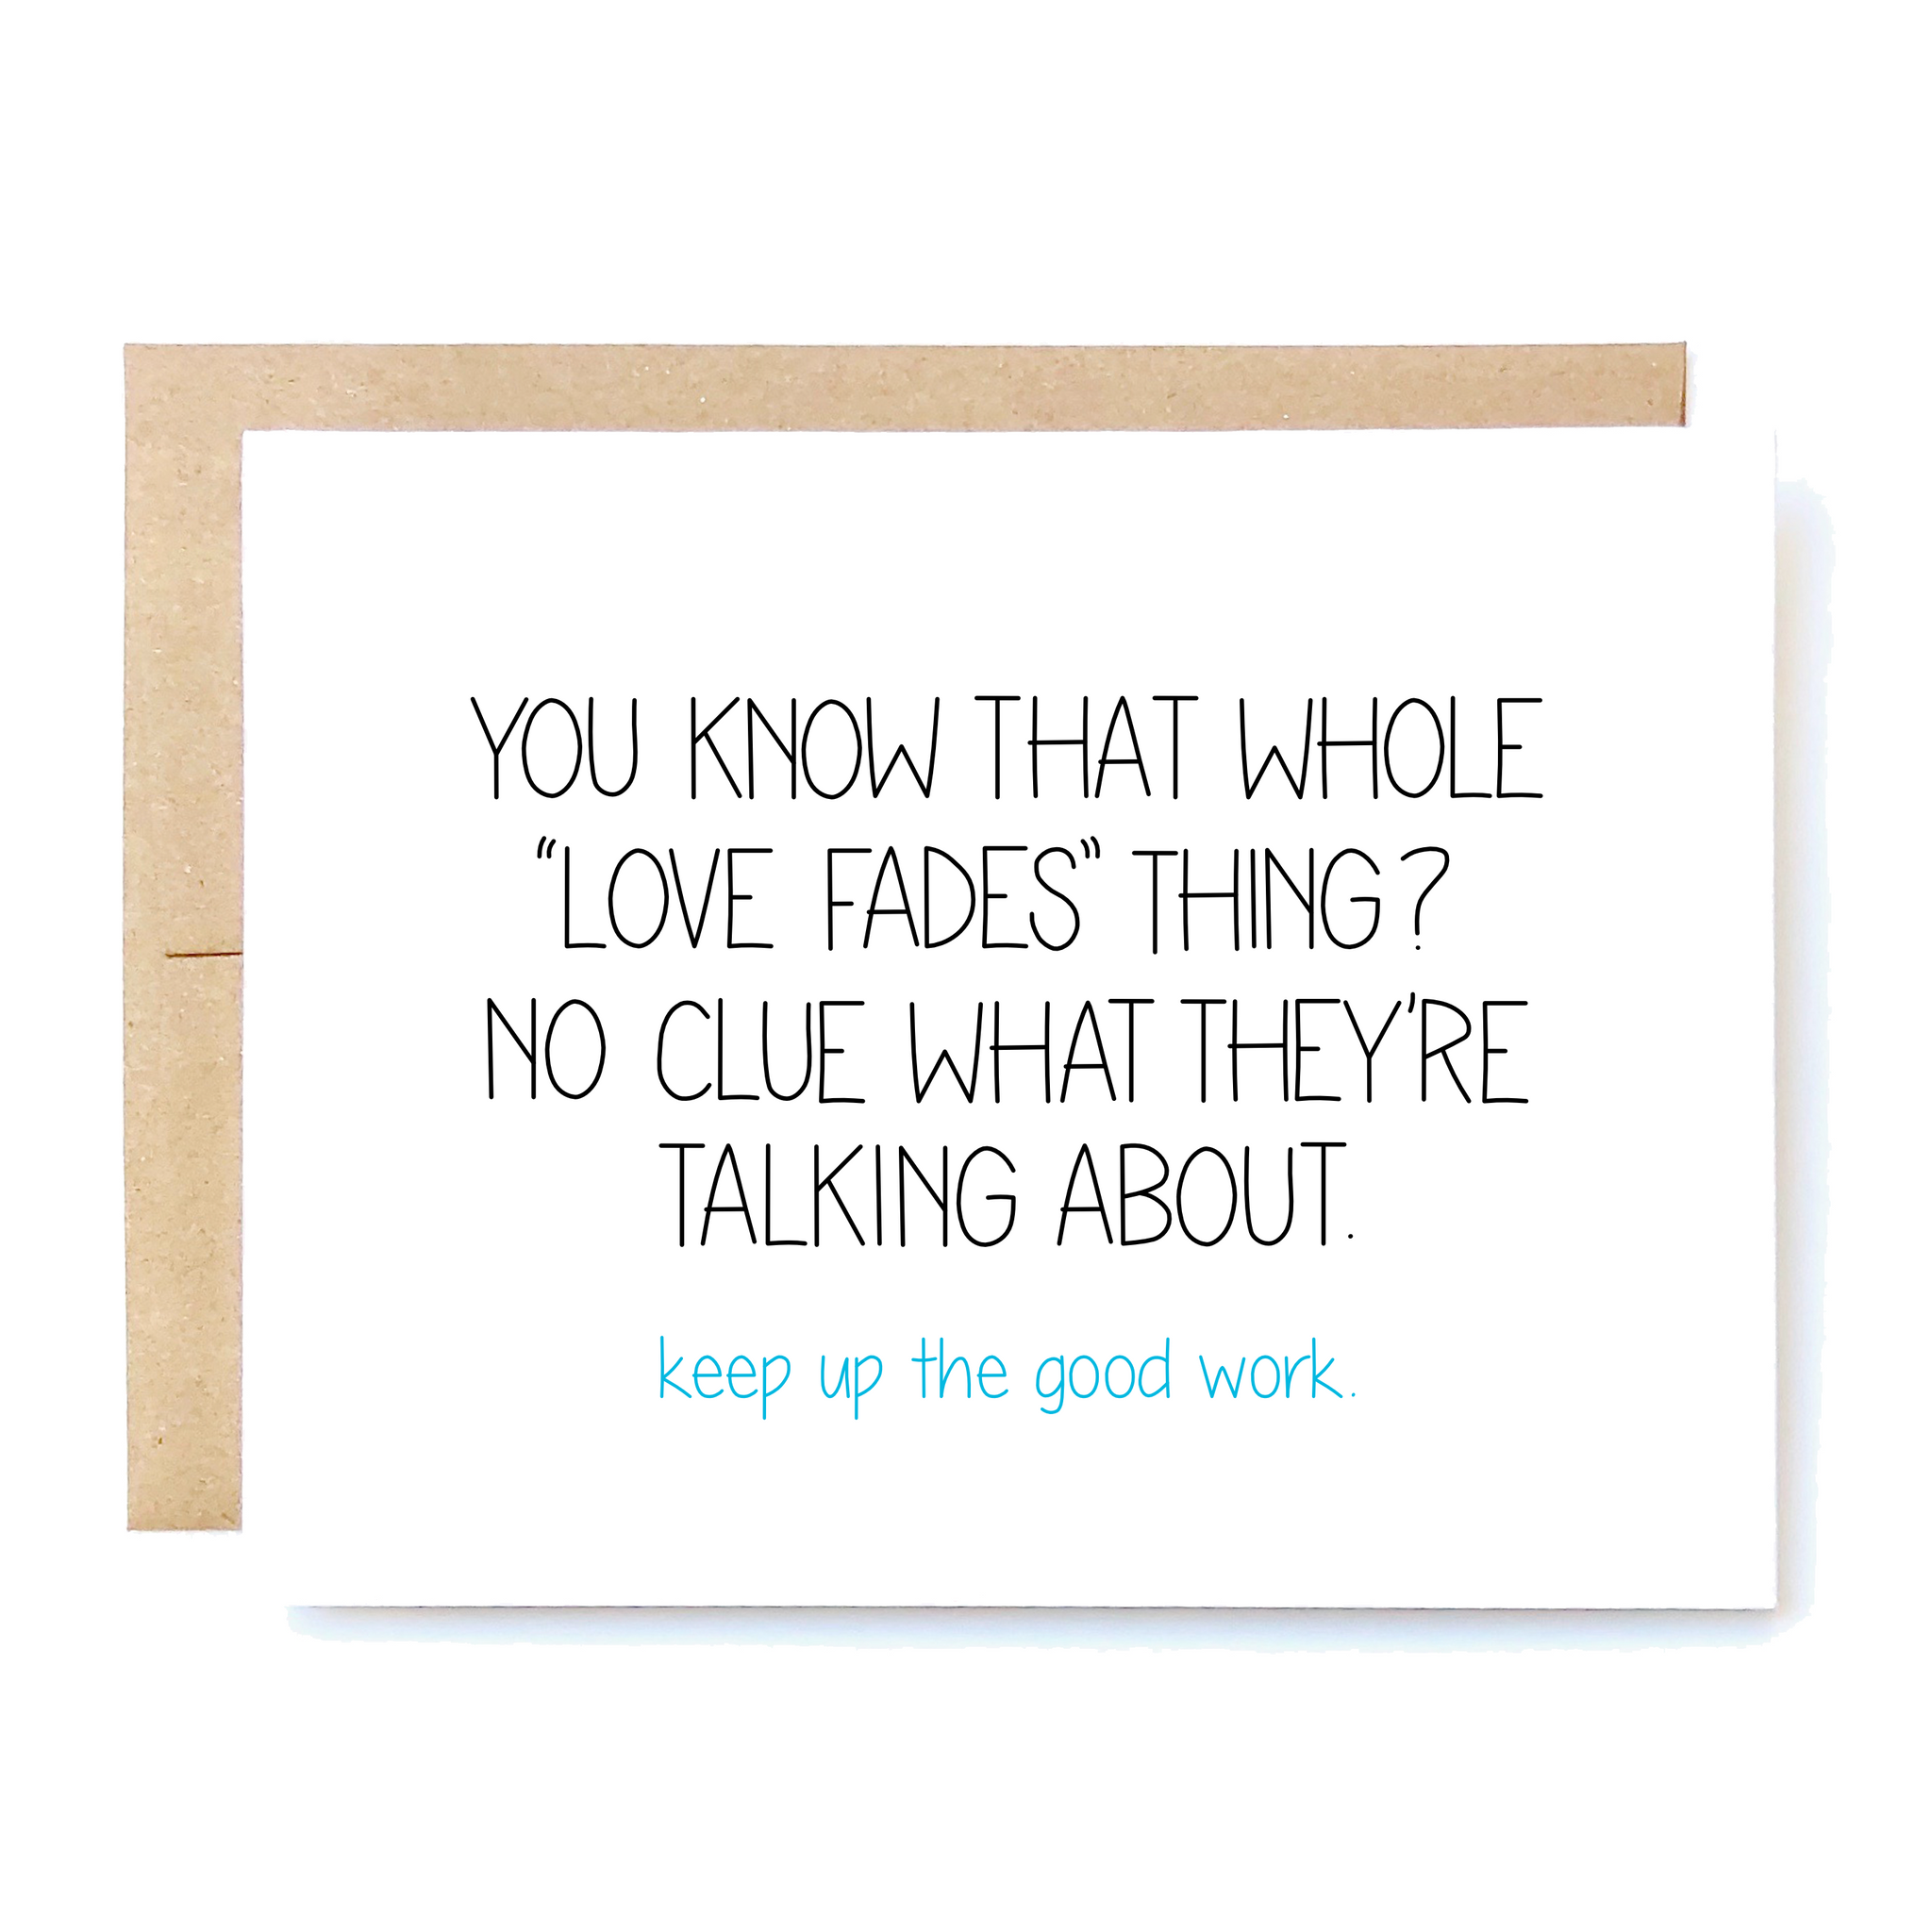 Card Front: You know that whole "love fades" thing? No clue what they are talking about. Keep up the good work.